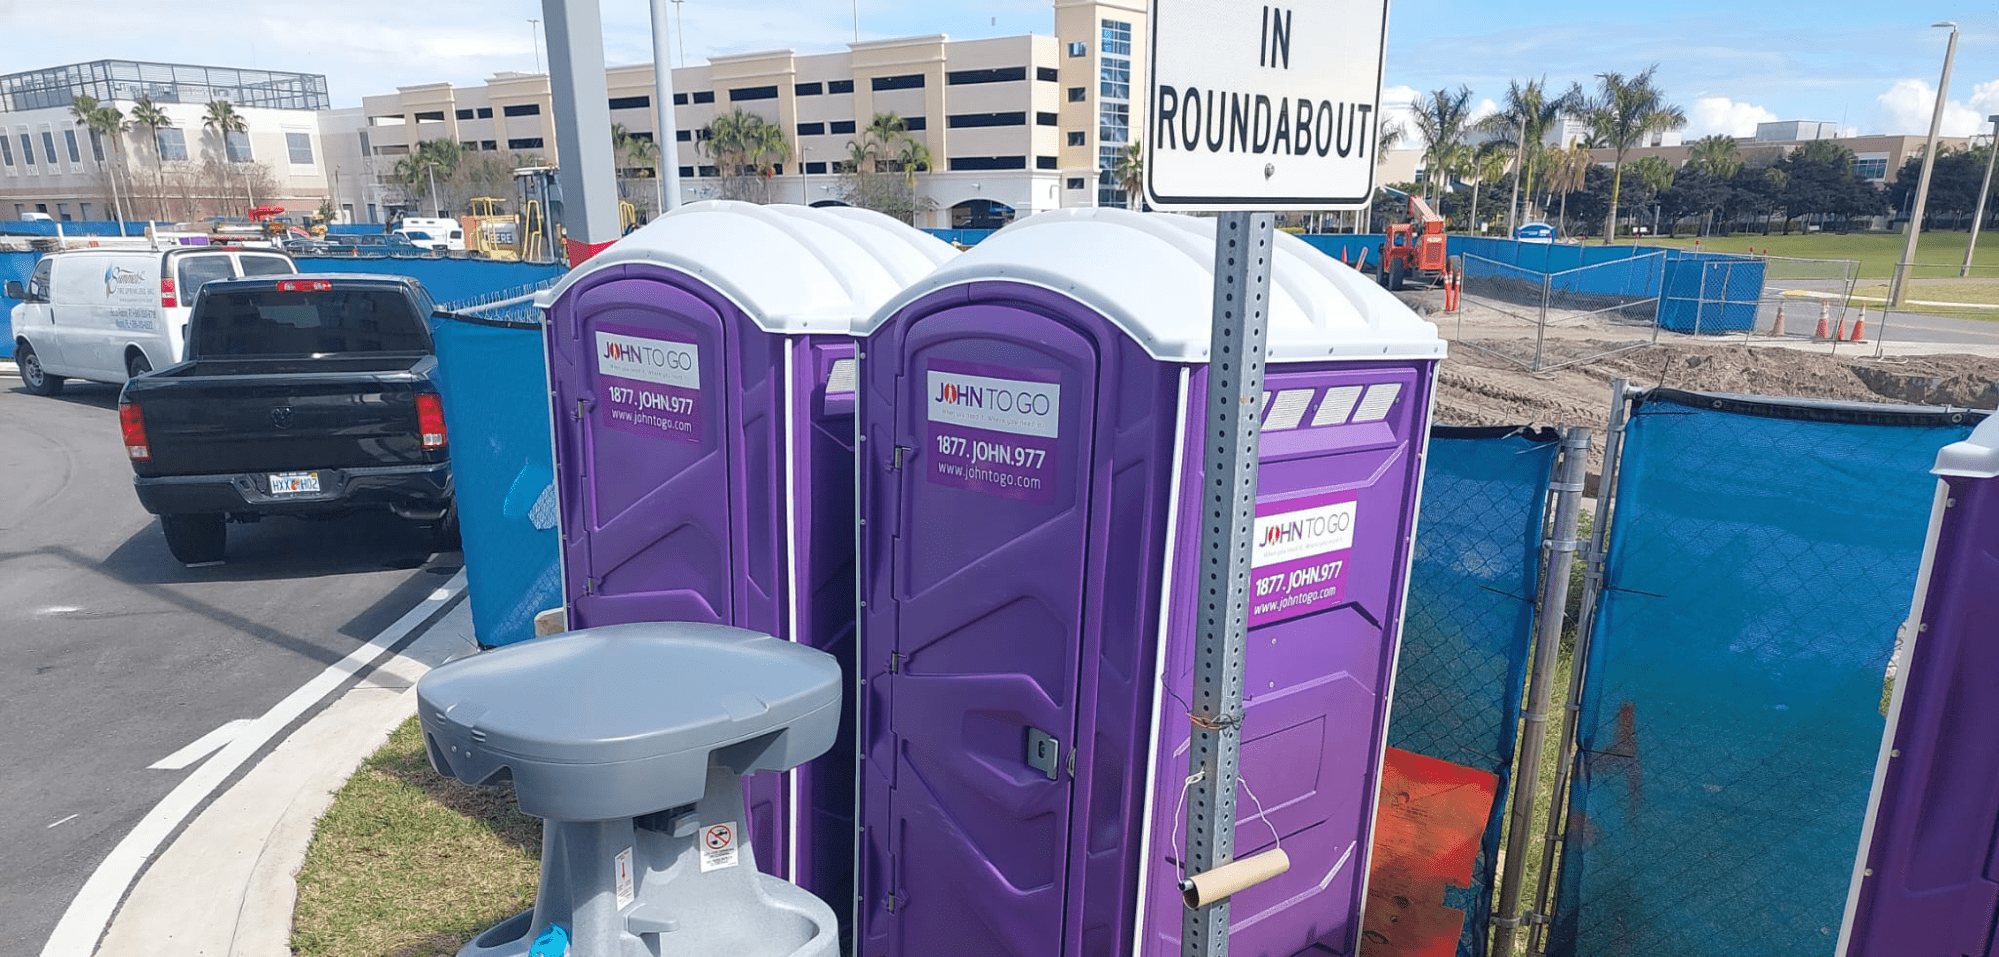 mobile bathrooms and washing sink near street